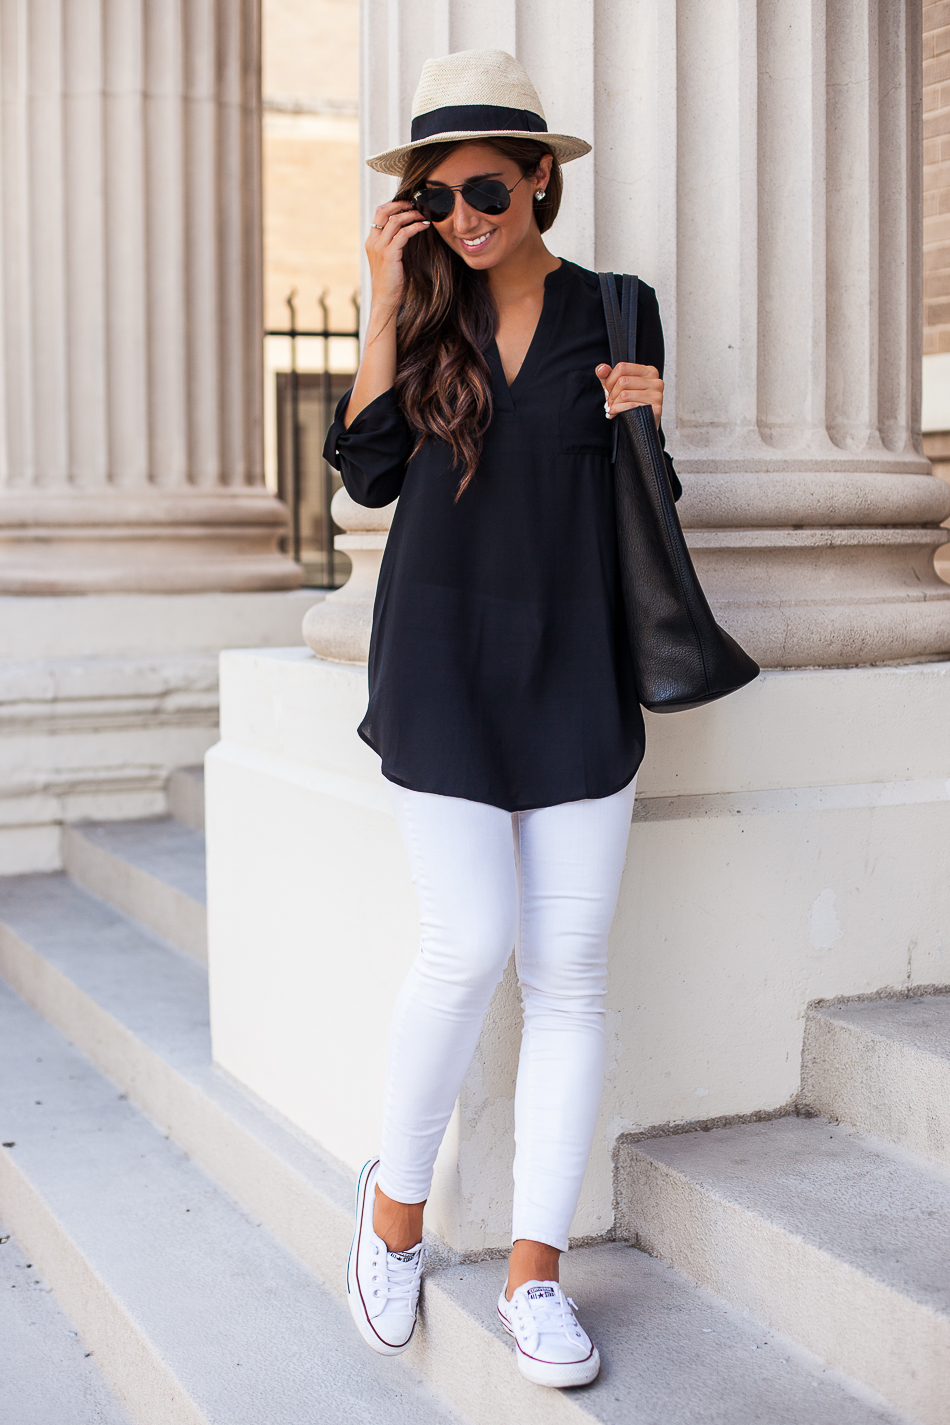 16 Chic Black and White Outfits to Wear Now - fashionsy.com